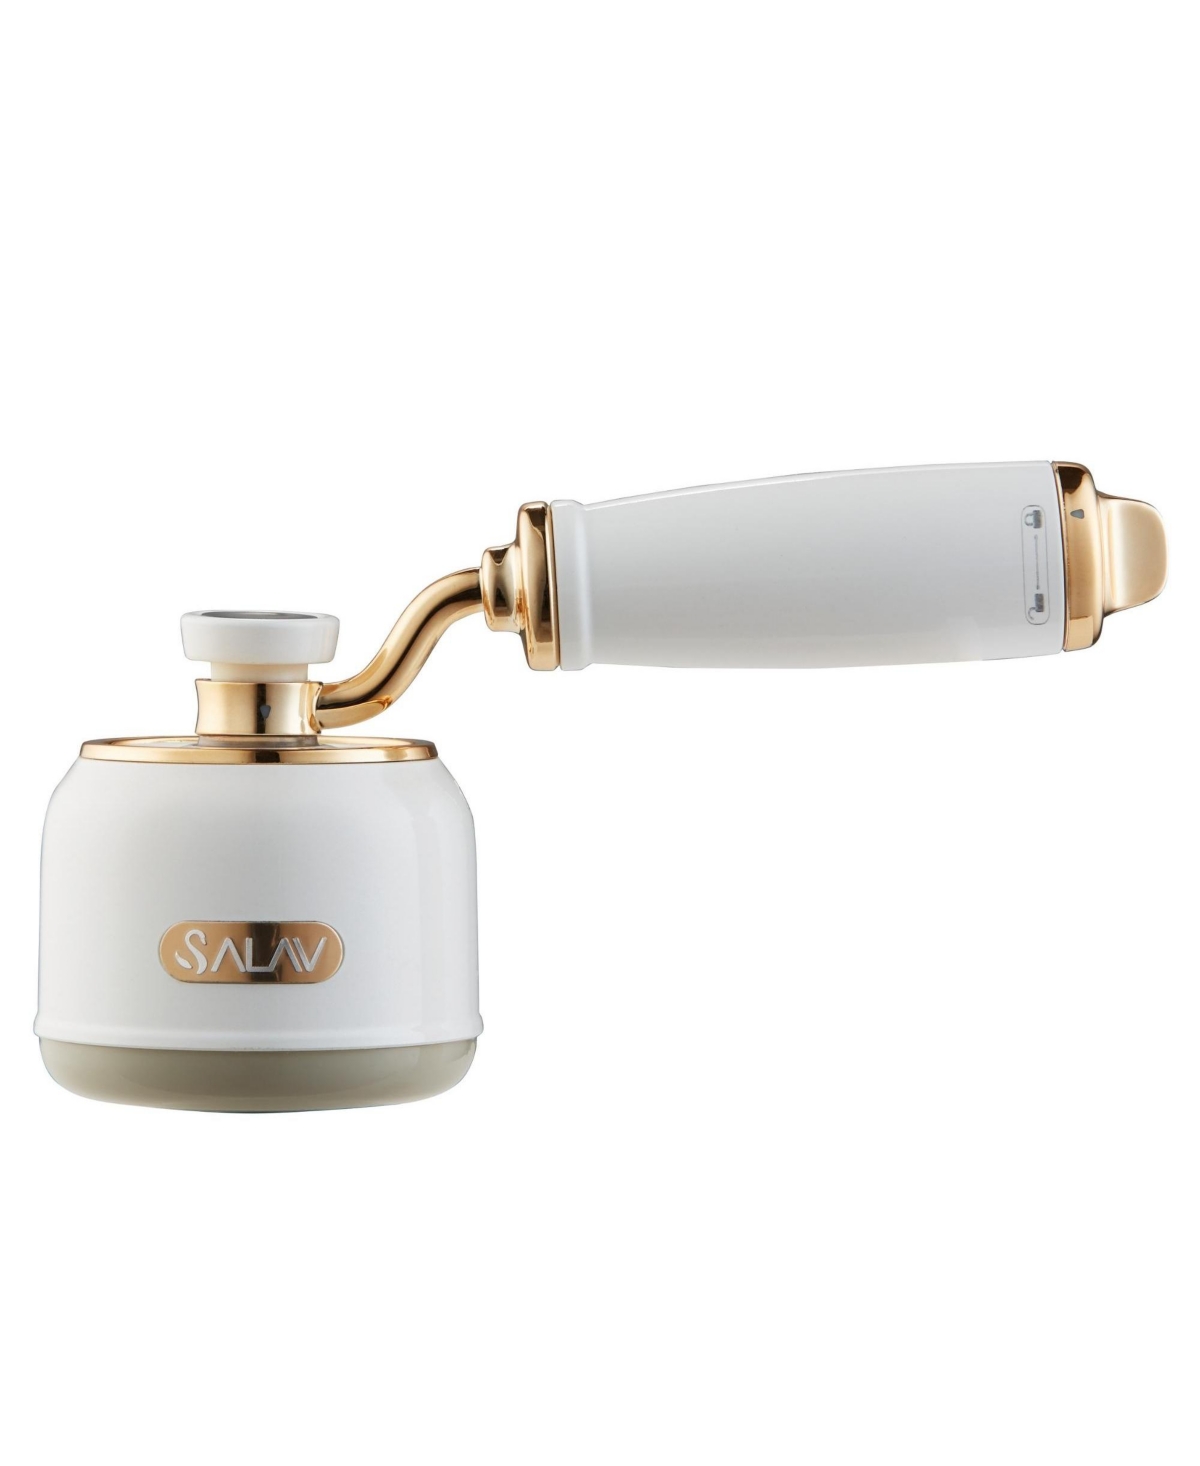 Salav Lr-900 Retro Edition Fabric Shaver And Lint Roller In Pearl